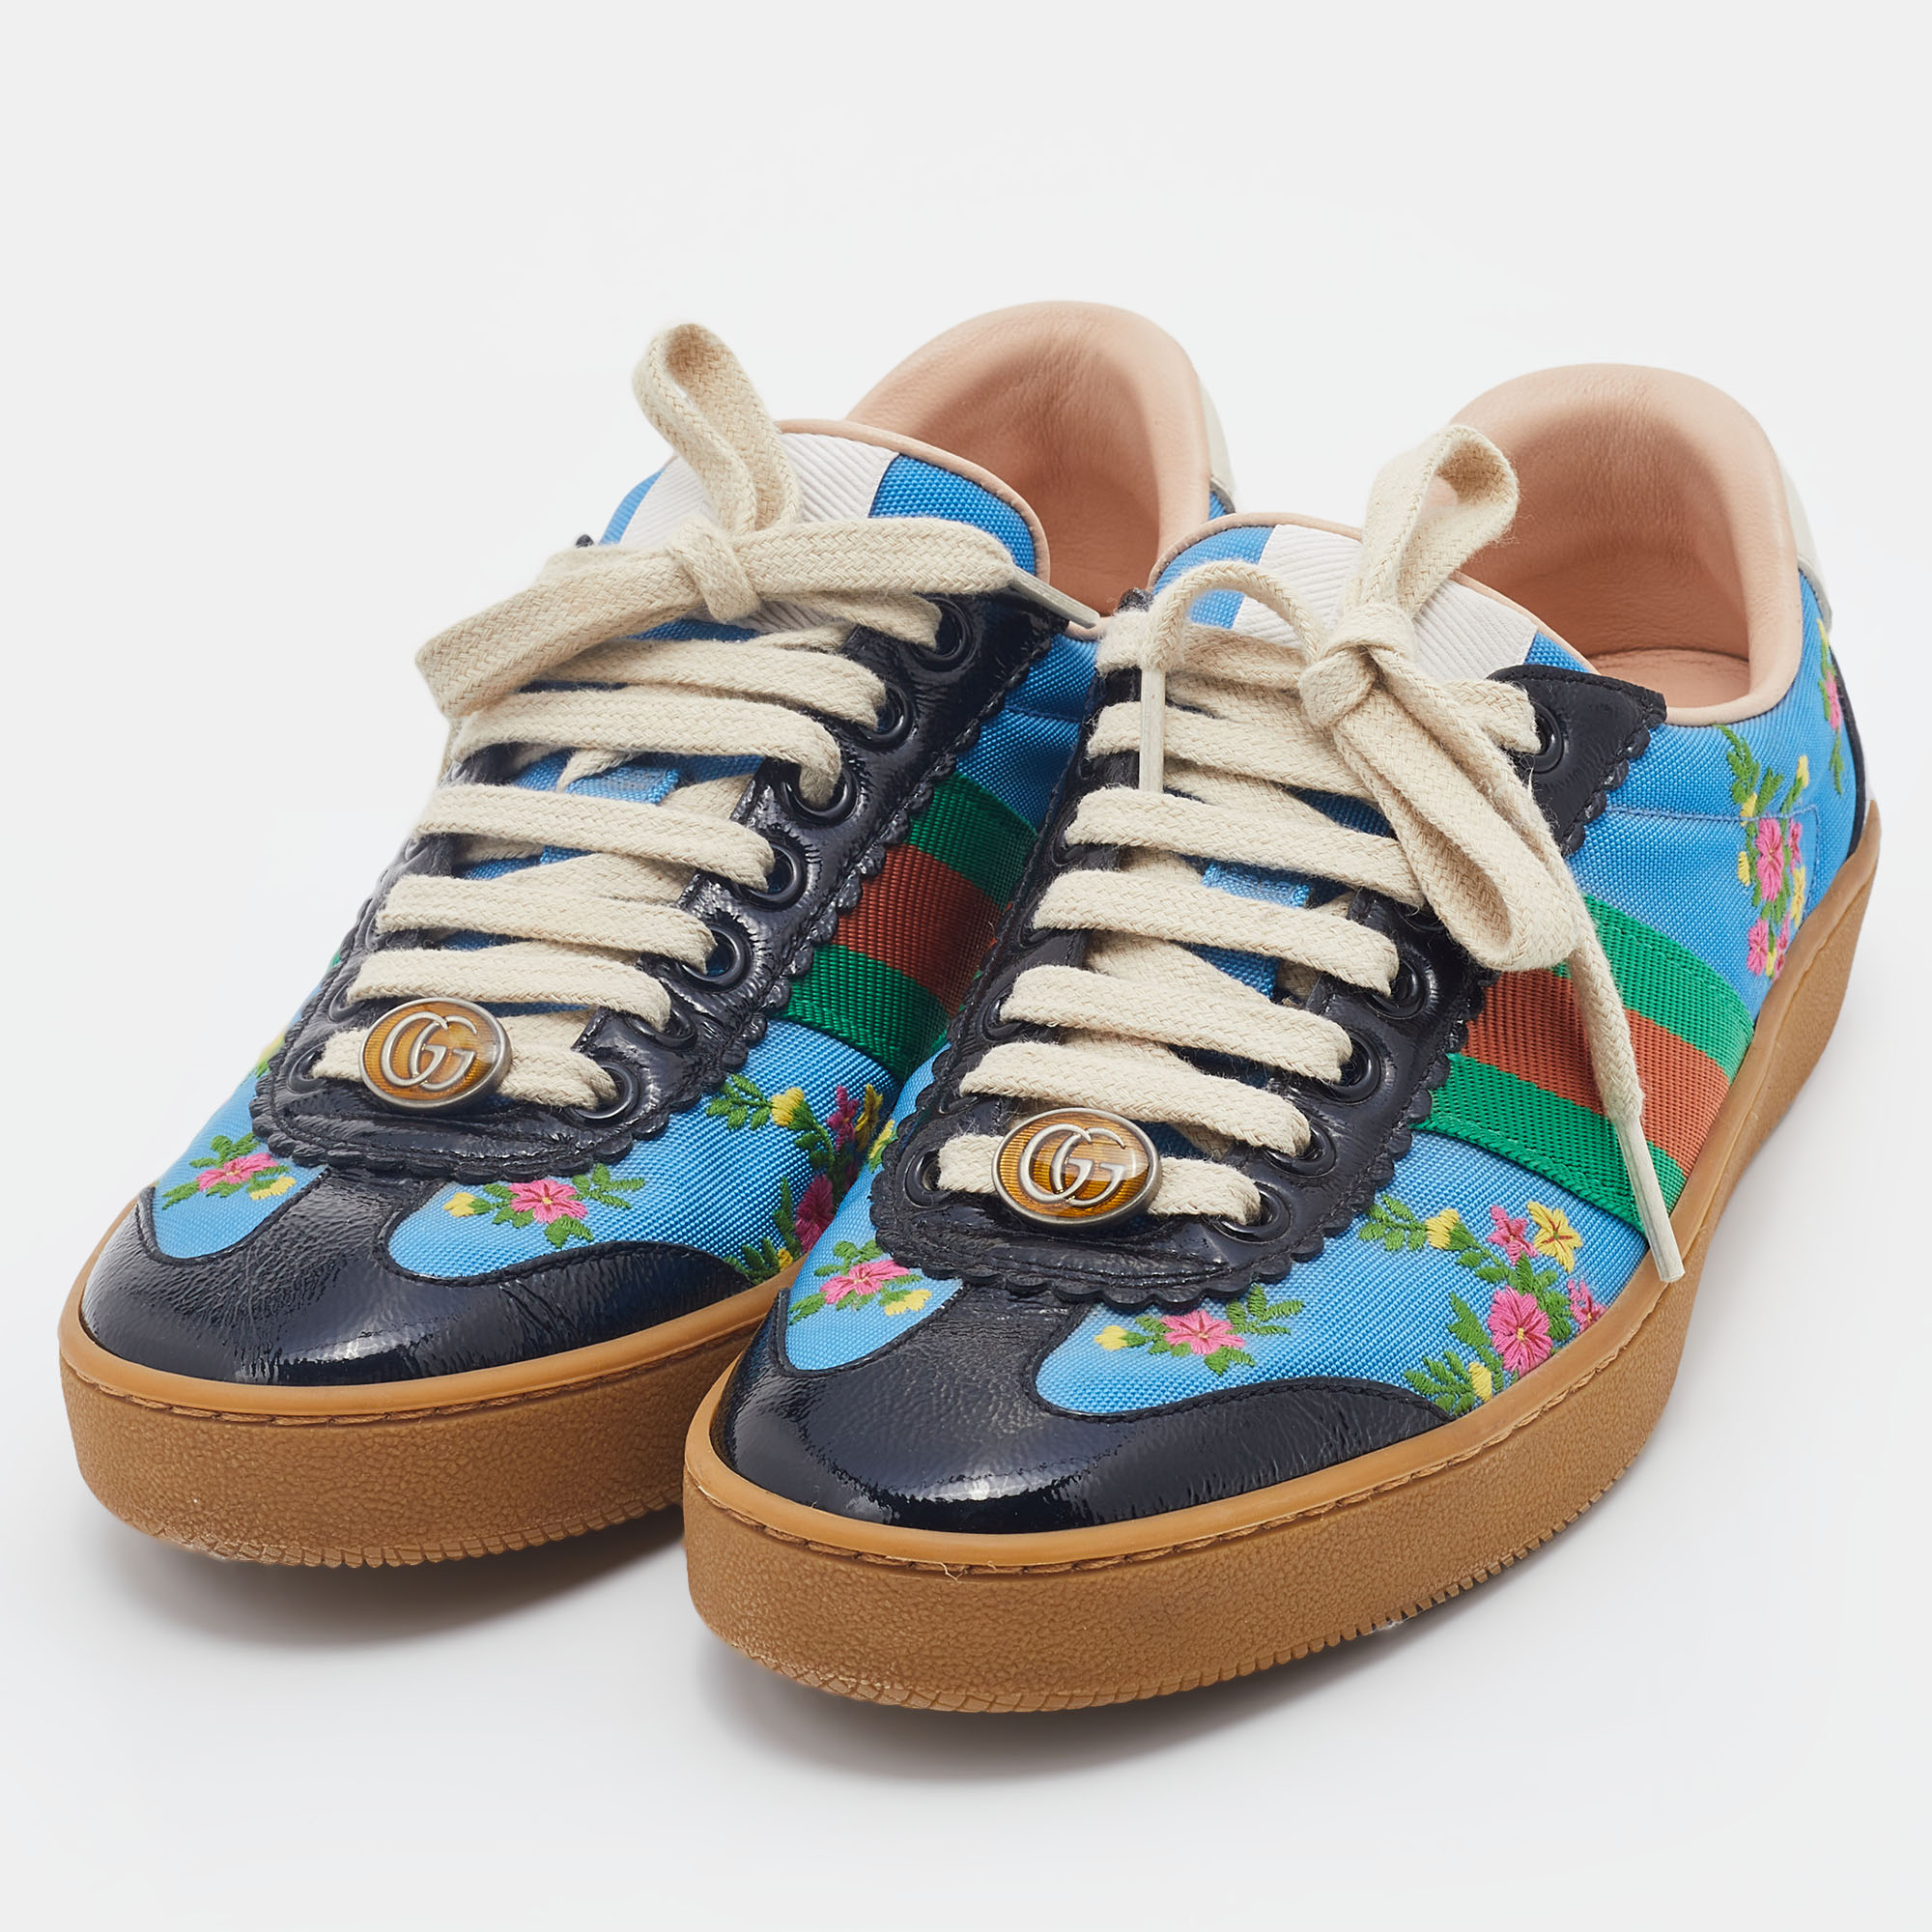 

Gucci Multicolor Floral Embroidered Fabric And Patent Leather Web Detail Low Top Sneakers Size